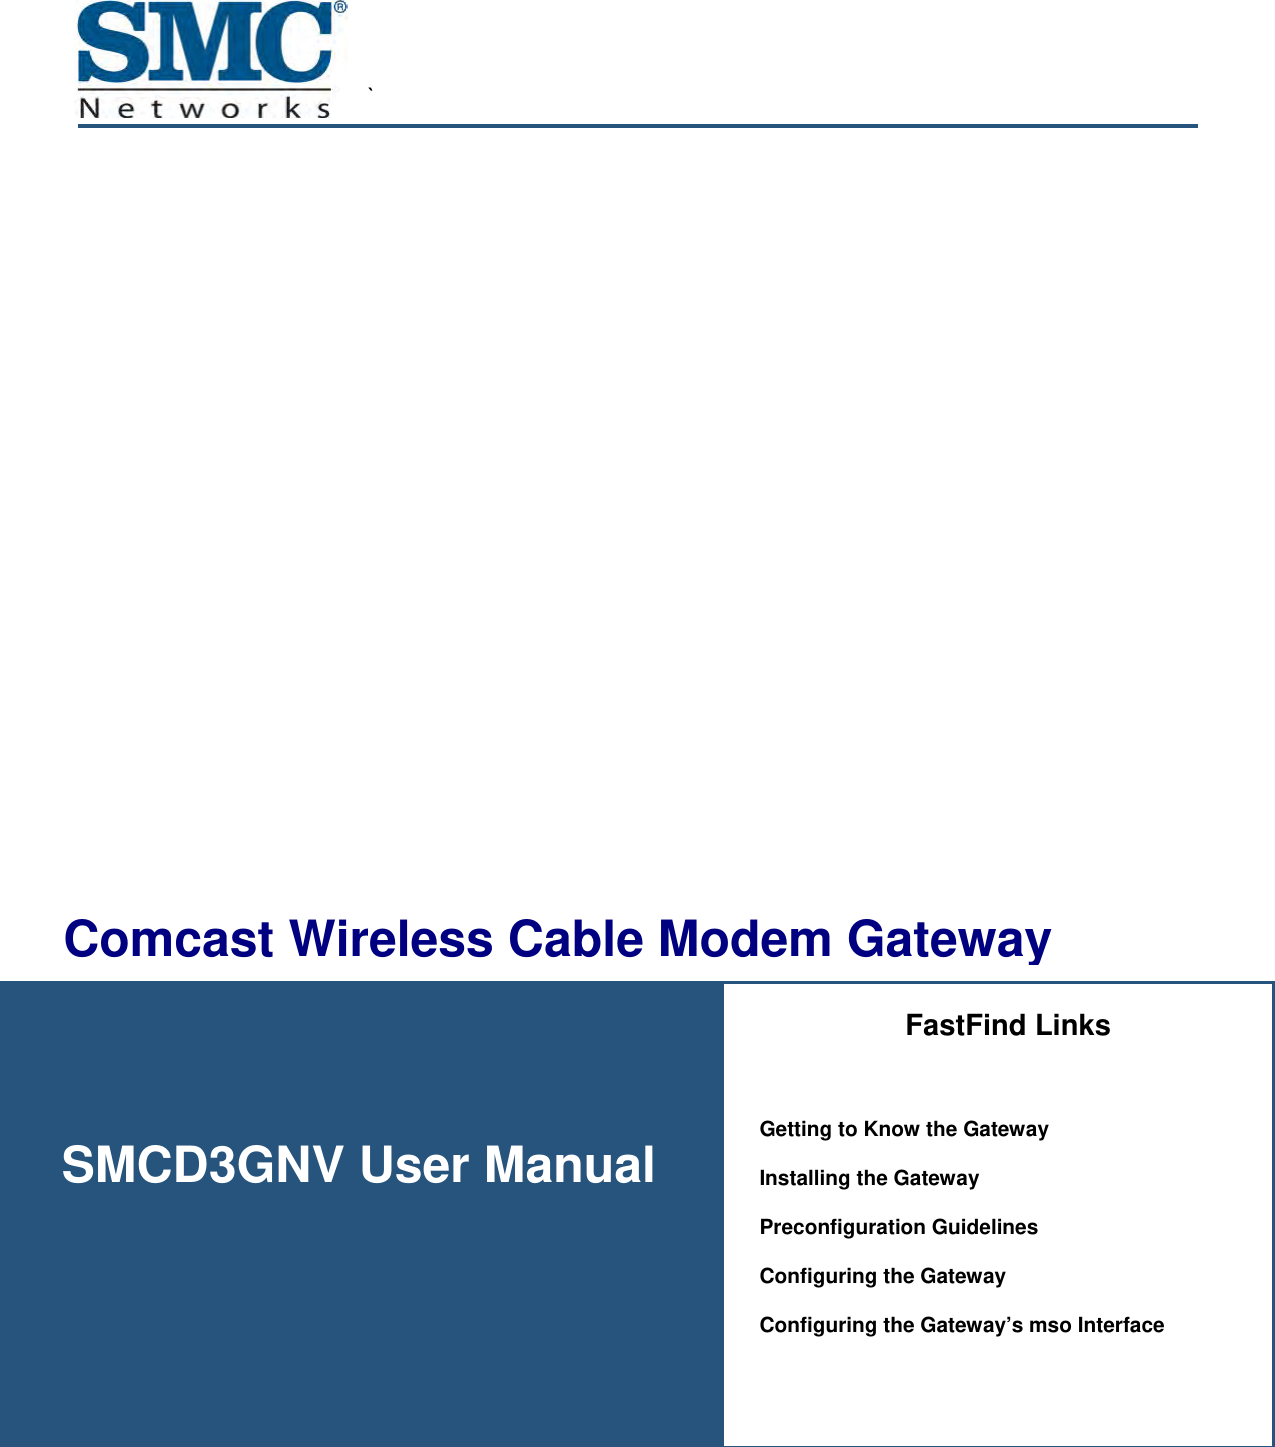  `       SMCD3GNV User Manual  Comcast Wireless Cable Modem Gateway FastFind Links  Getting to Know the Gateway Installing the Gateway Preconfiguration Guidelines Configuring the Gateway Configuring the Gateway’s mso Interface 